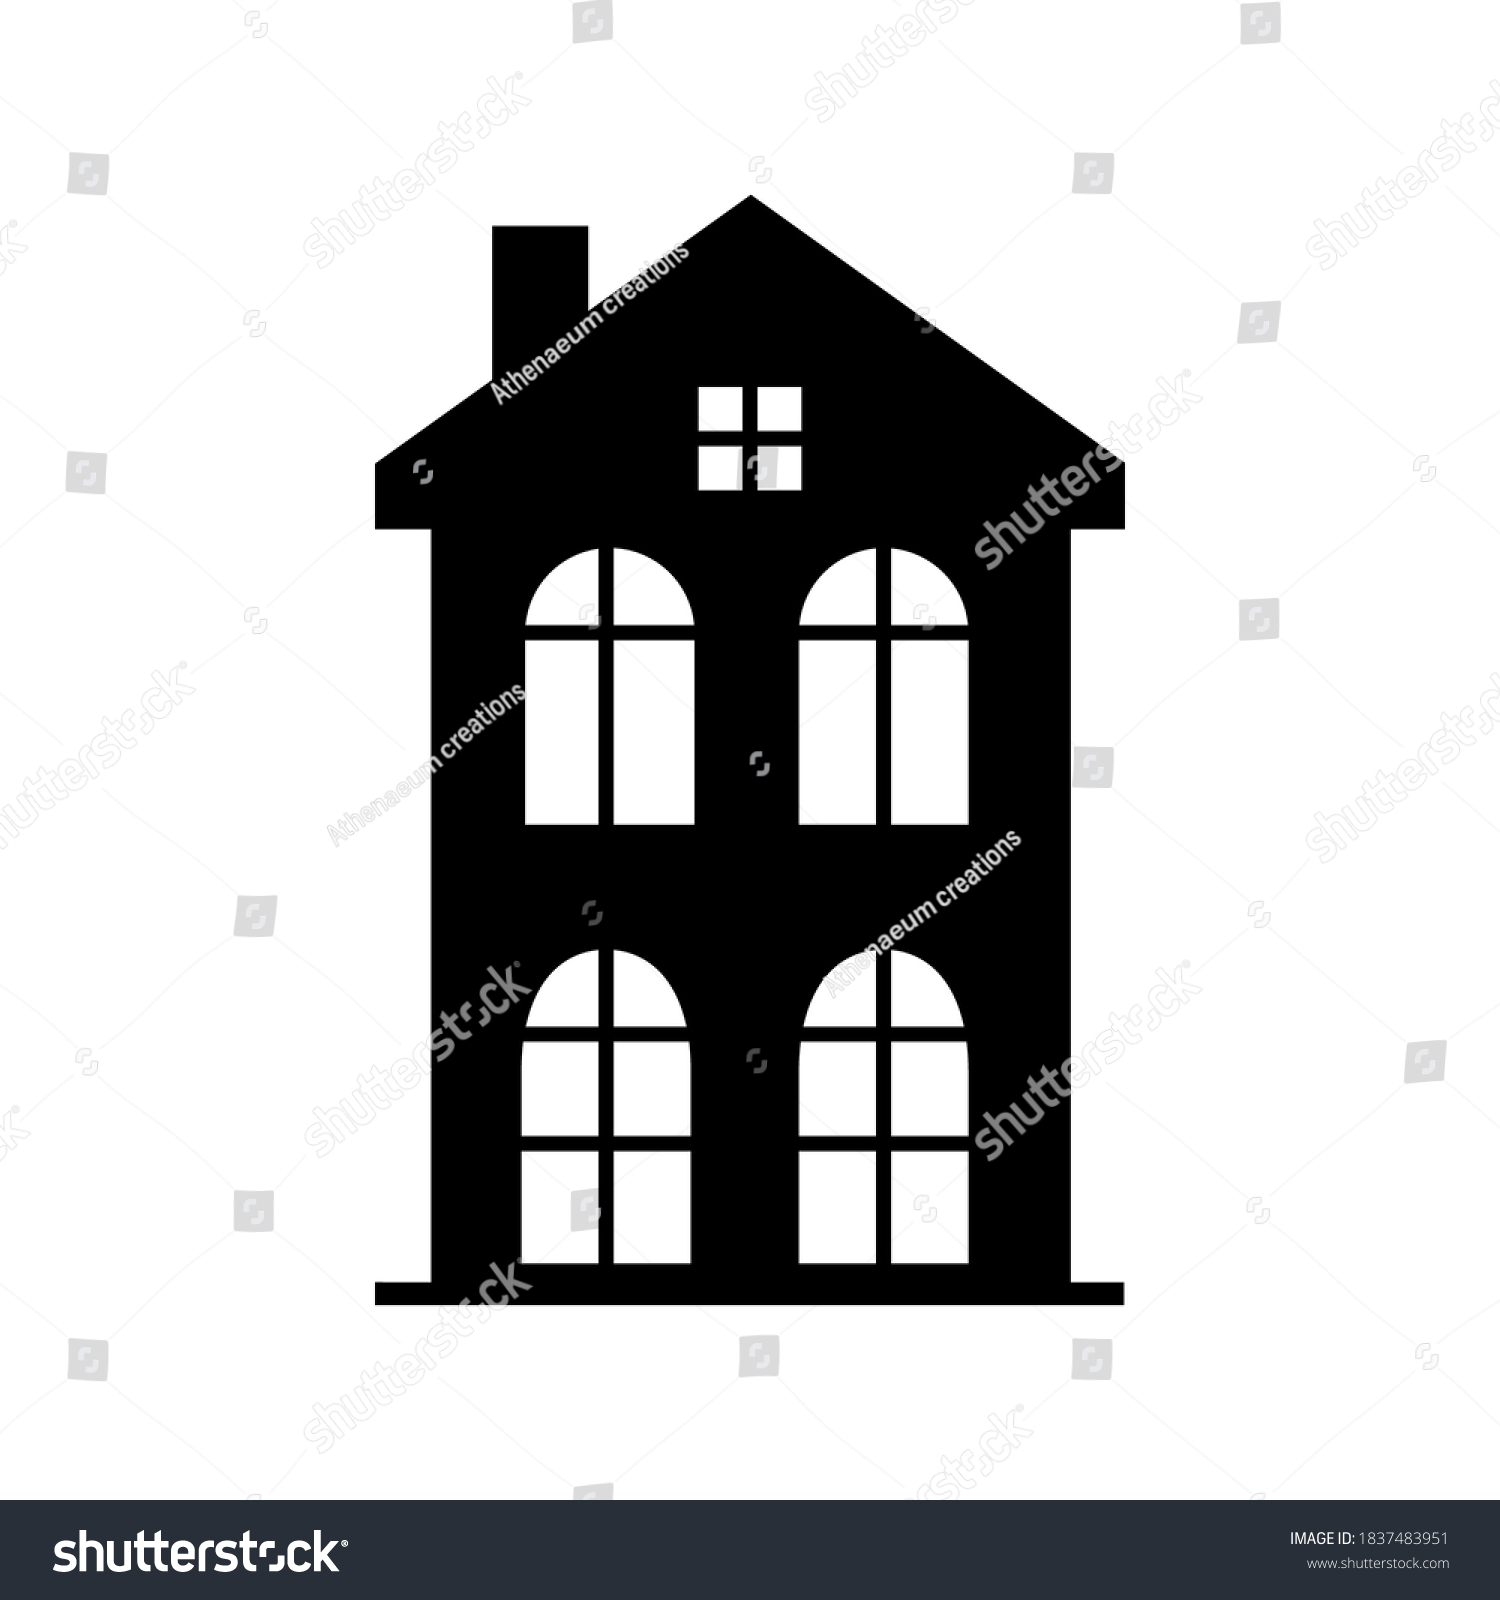 Black House Silhouette Building Icon Element Stock Vector (Royalty Free ...